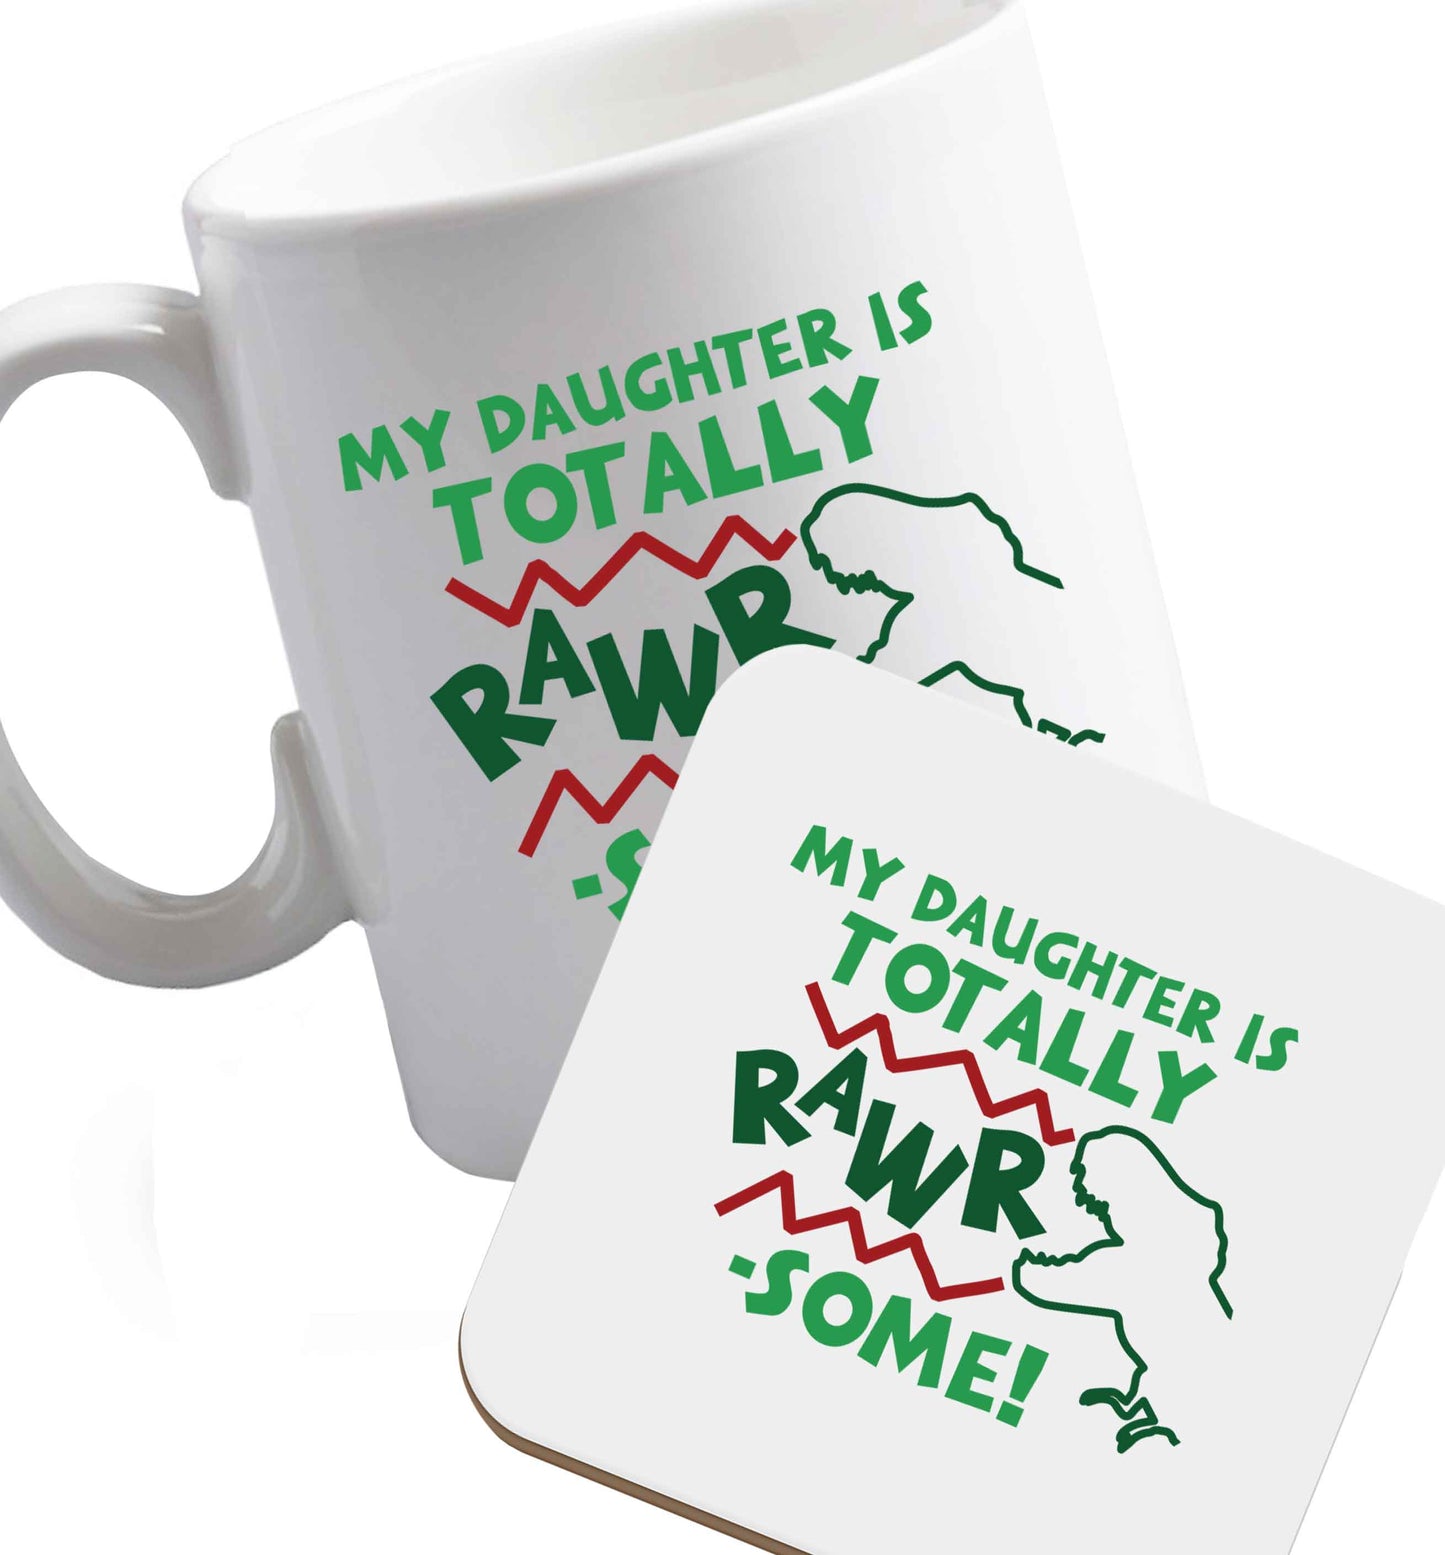 10 oz My daughter is totally rawrsome ceramic mug and coaster set right handed